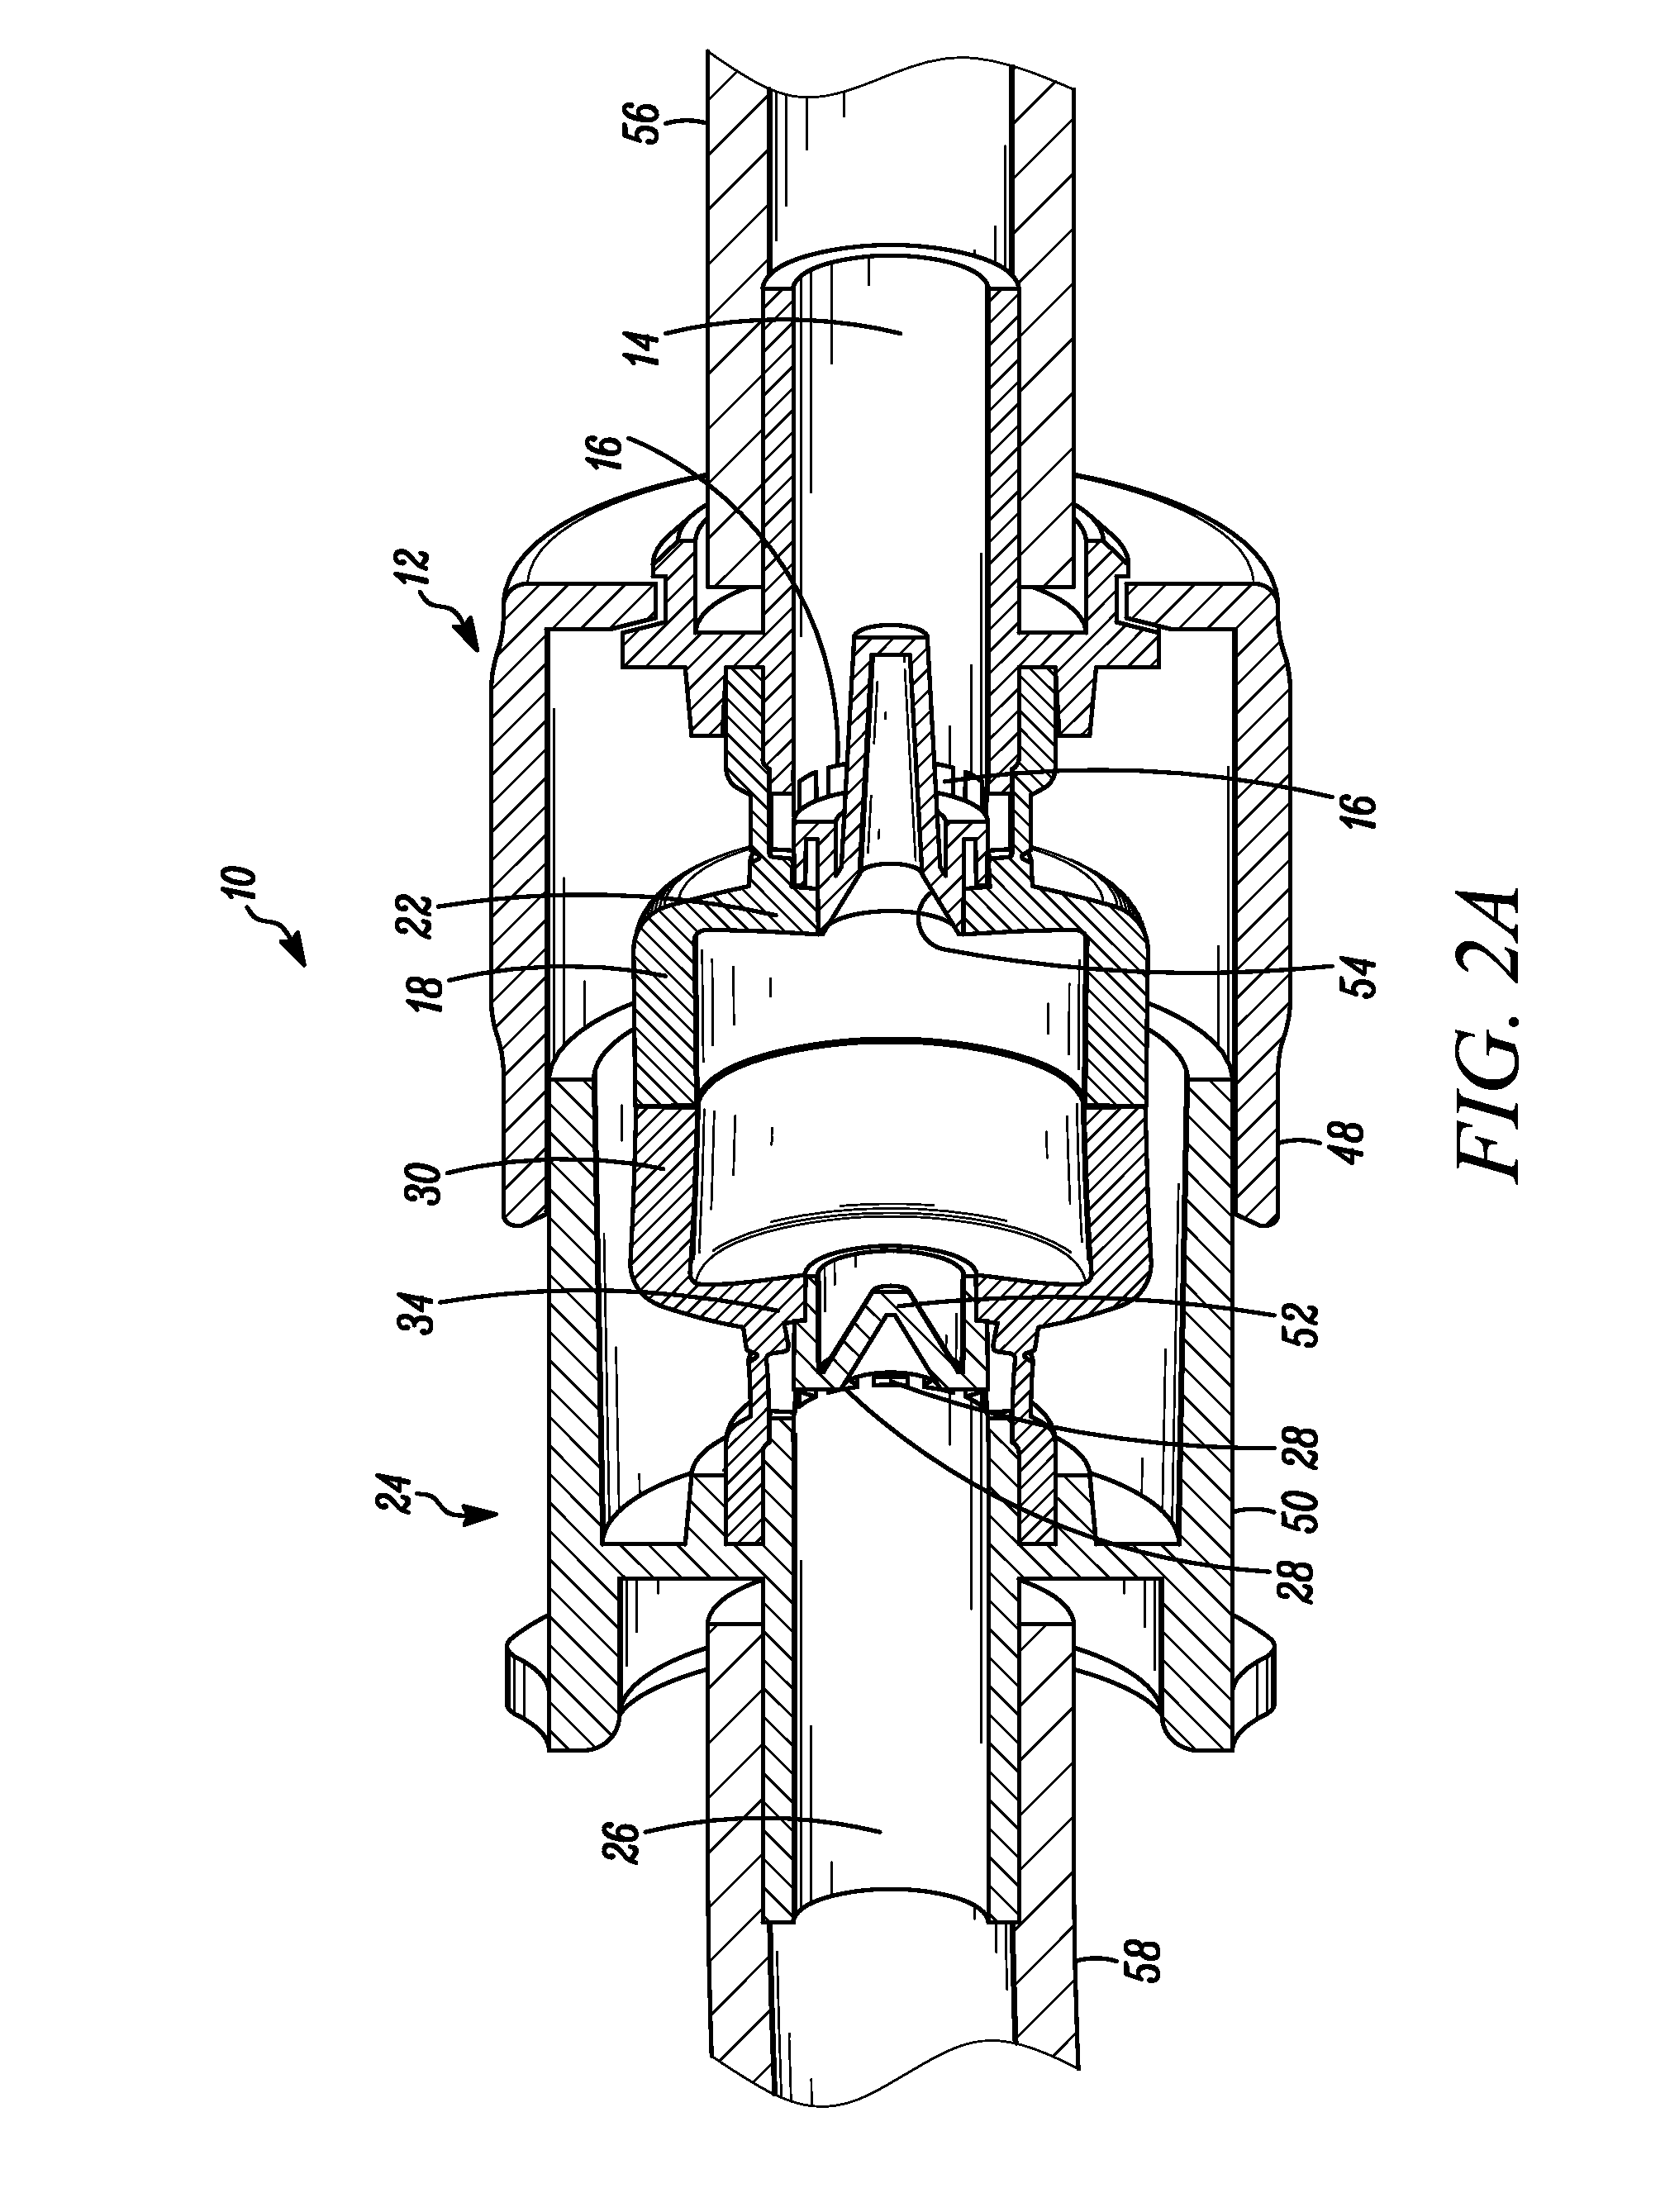 Aseptic connector with deflectable ring of concern and method